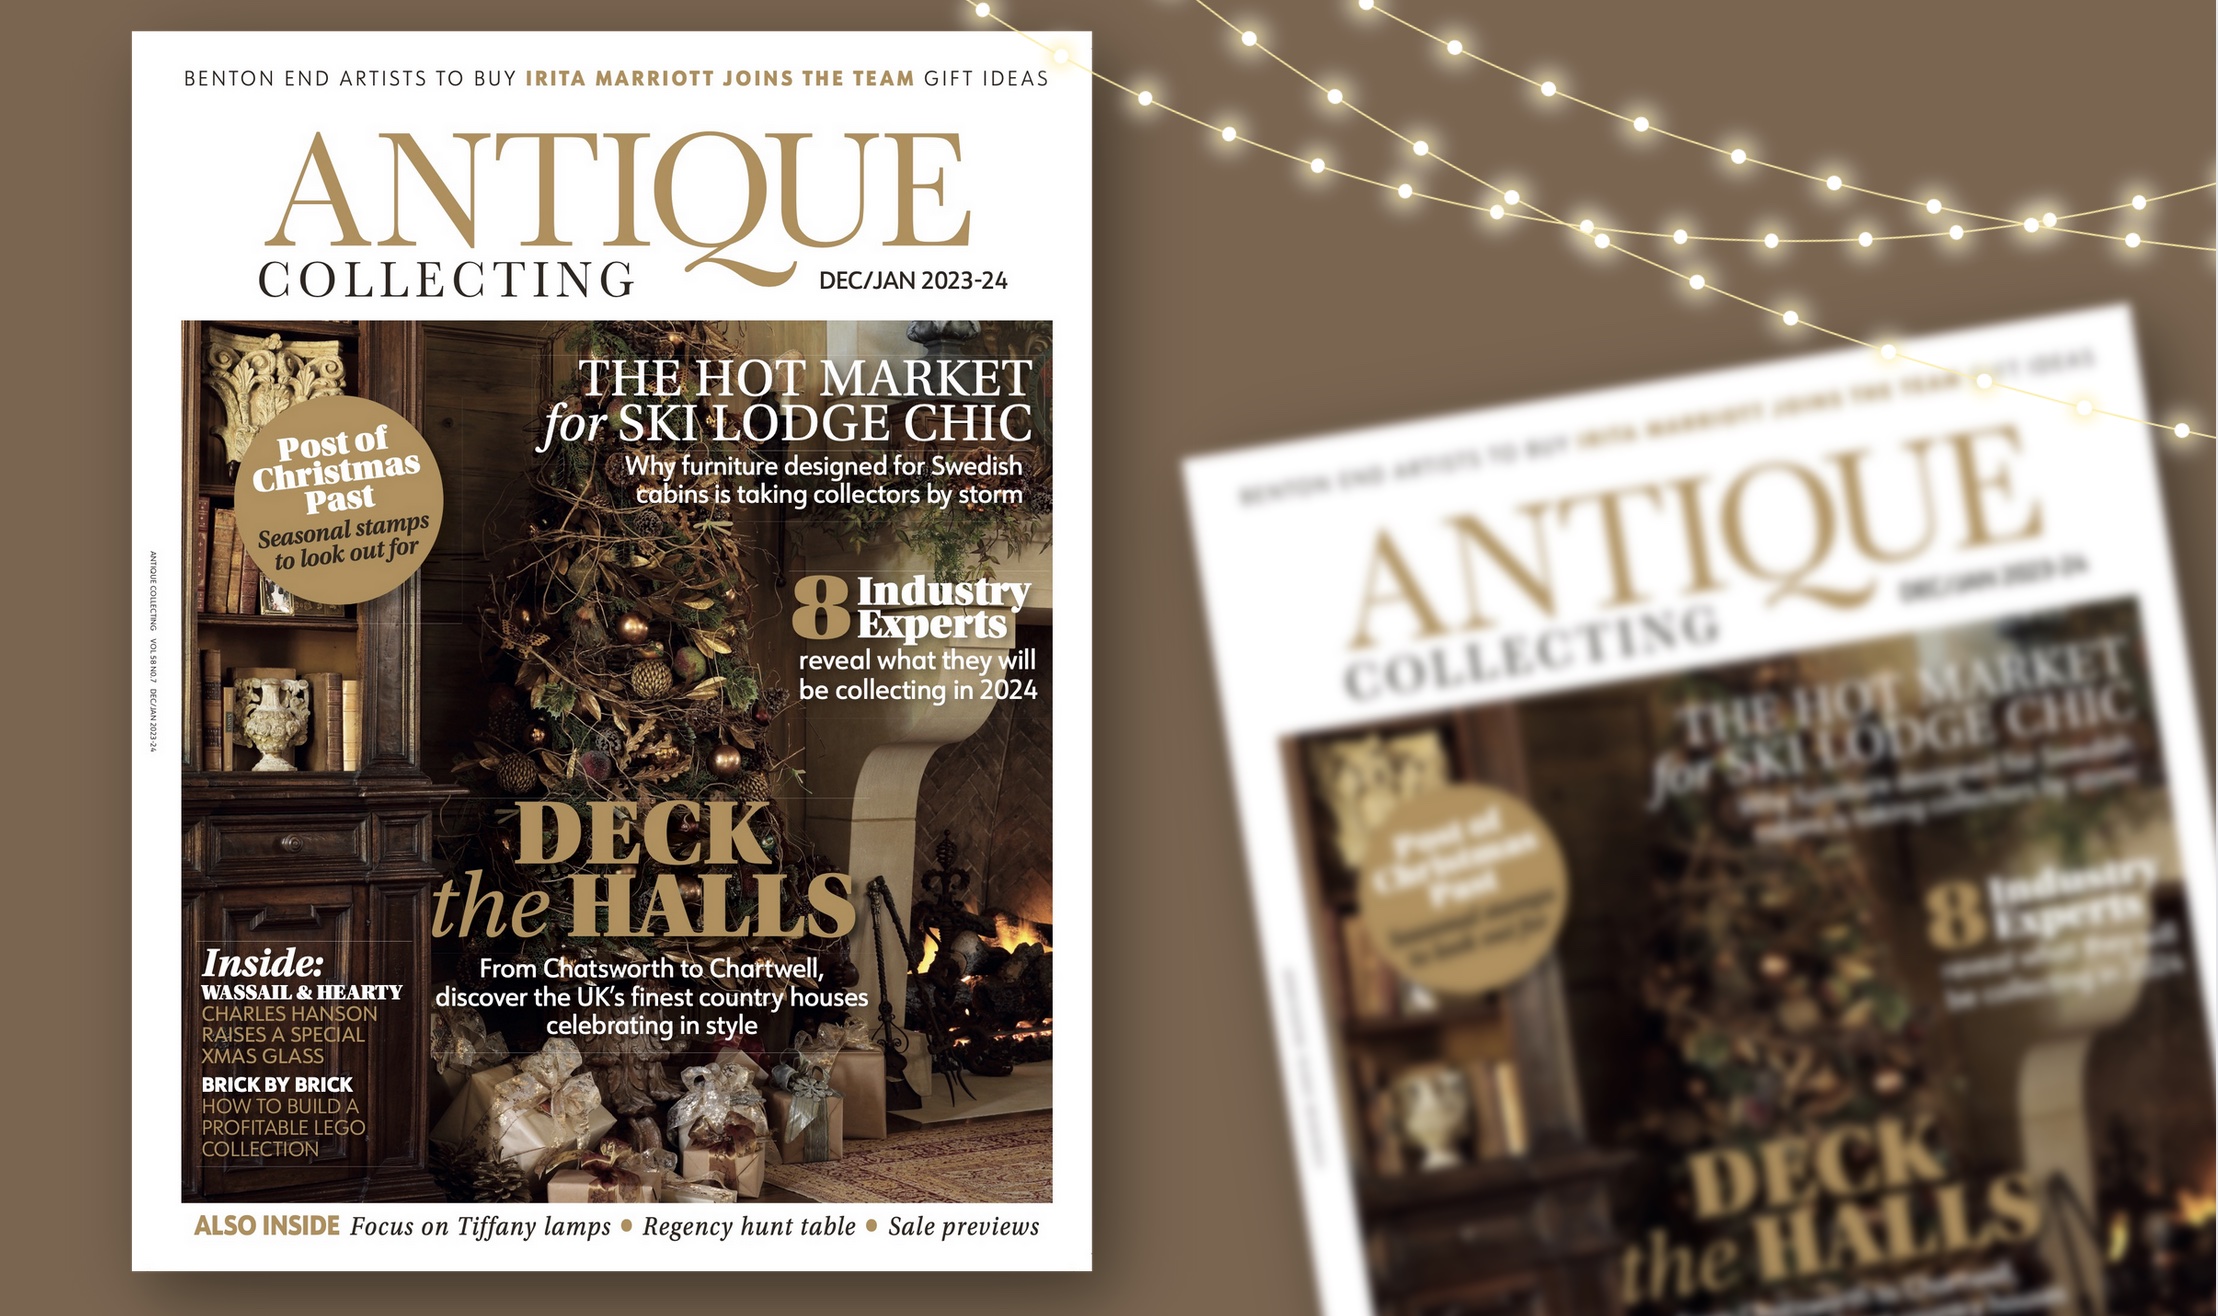 Christmas double issue of Antique Collecting magazine – Antique Collecting